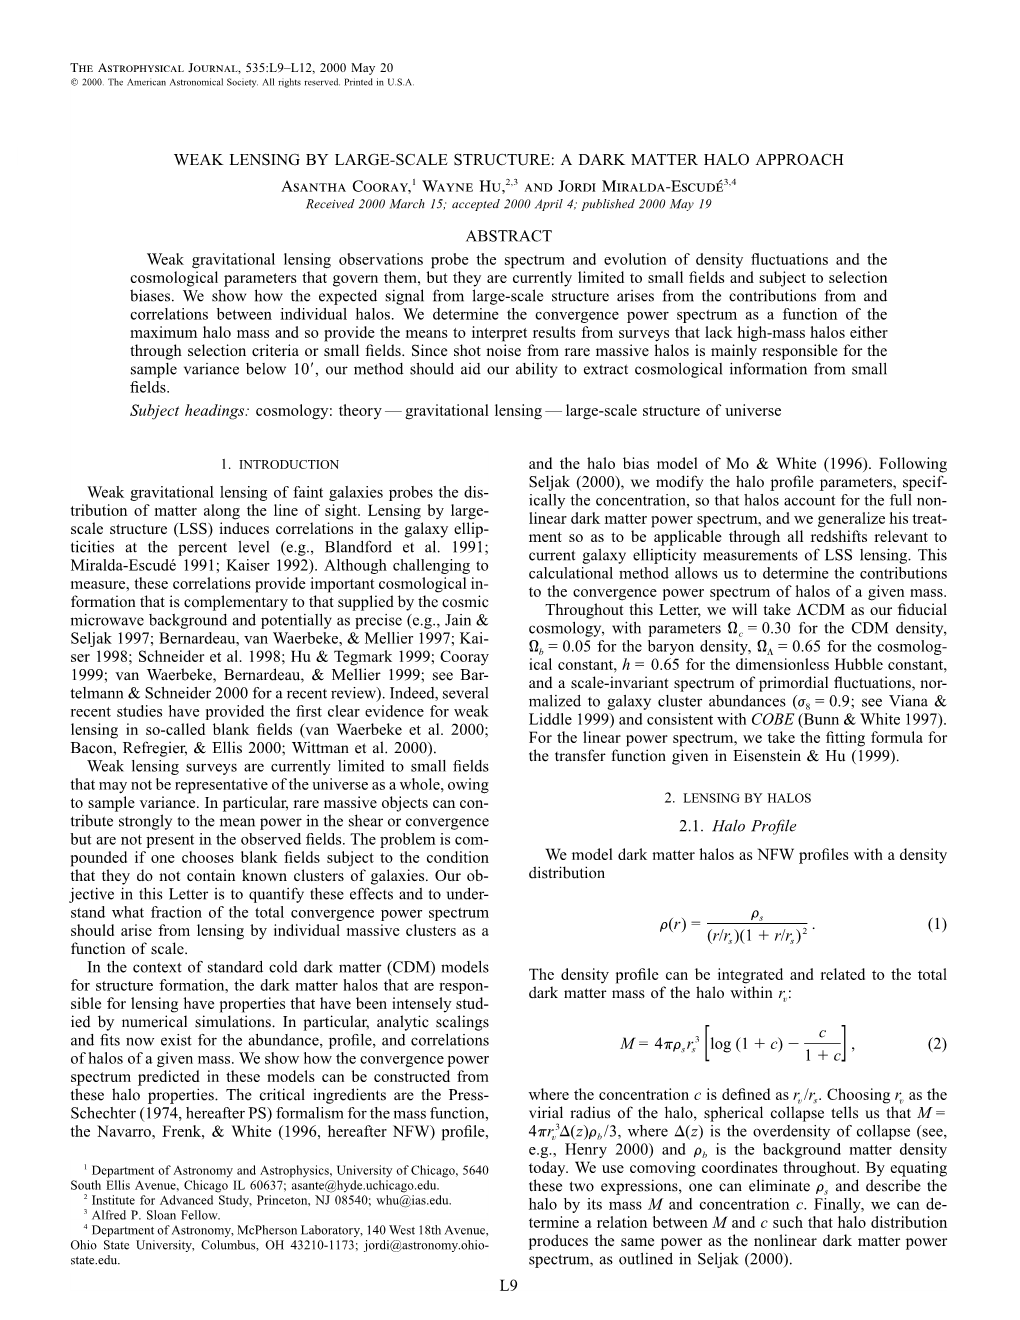 A DARK MATTER HALO APPROACH Asantha Cooray,1 Wayne Hu,2,3 and Jordi Miralda-Escude´ 3,4 Received 2000 March 15; Accepted 2000 April 4; Published 2000 May 19